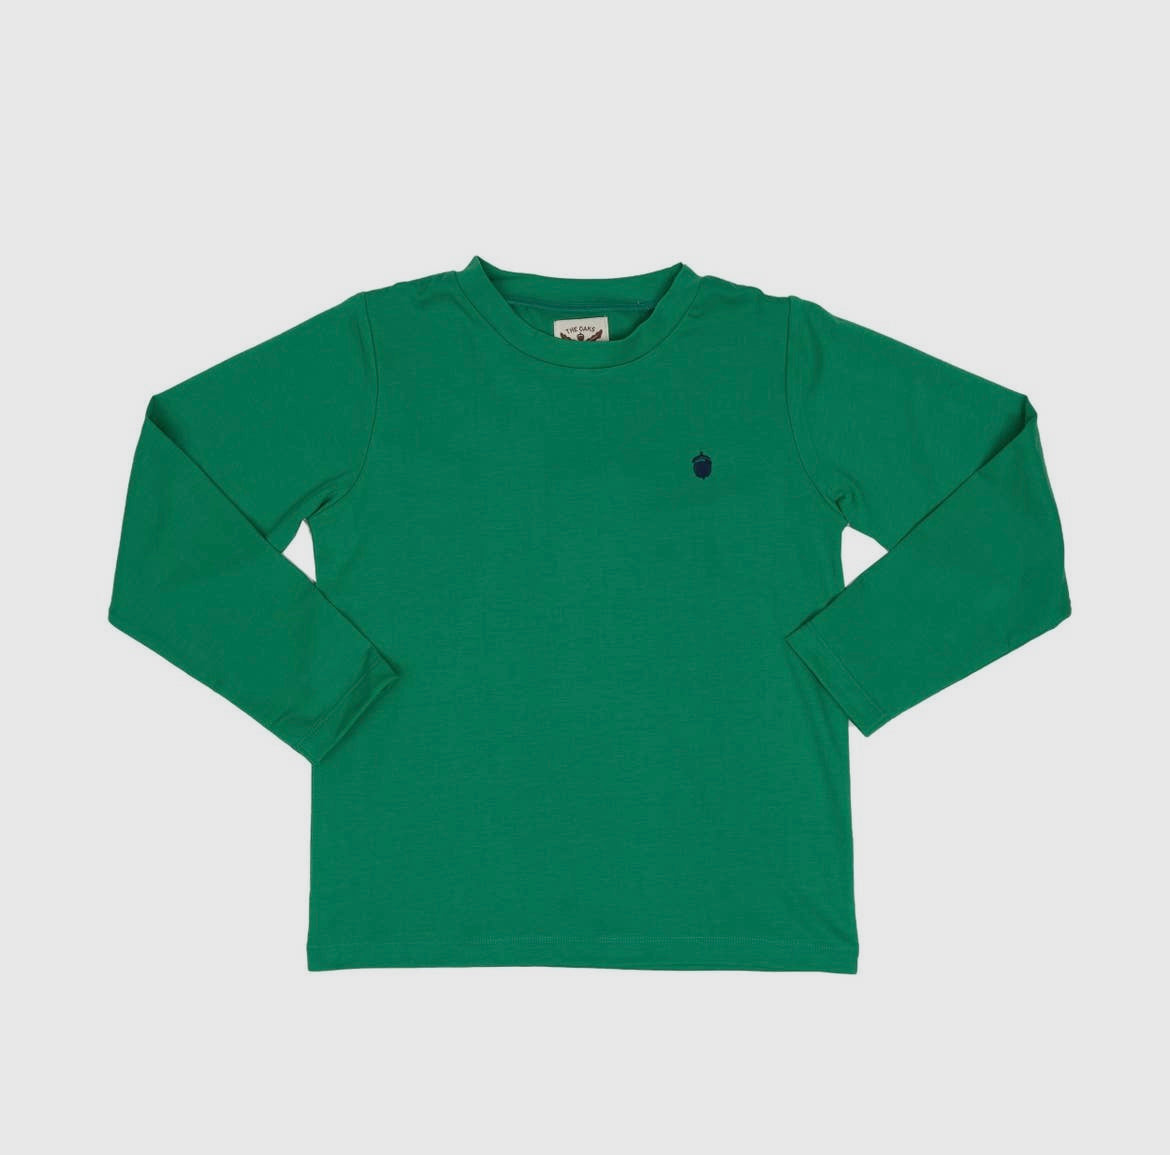 L/S Signature Green Tee with Navy Acorn